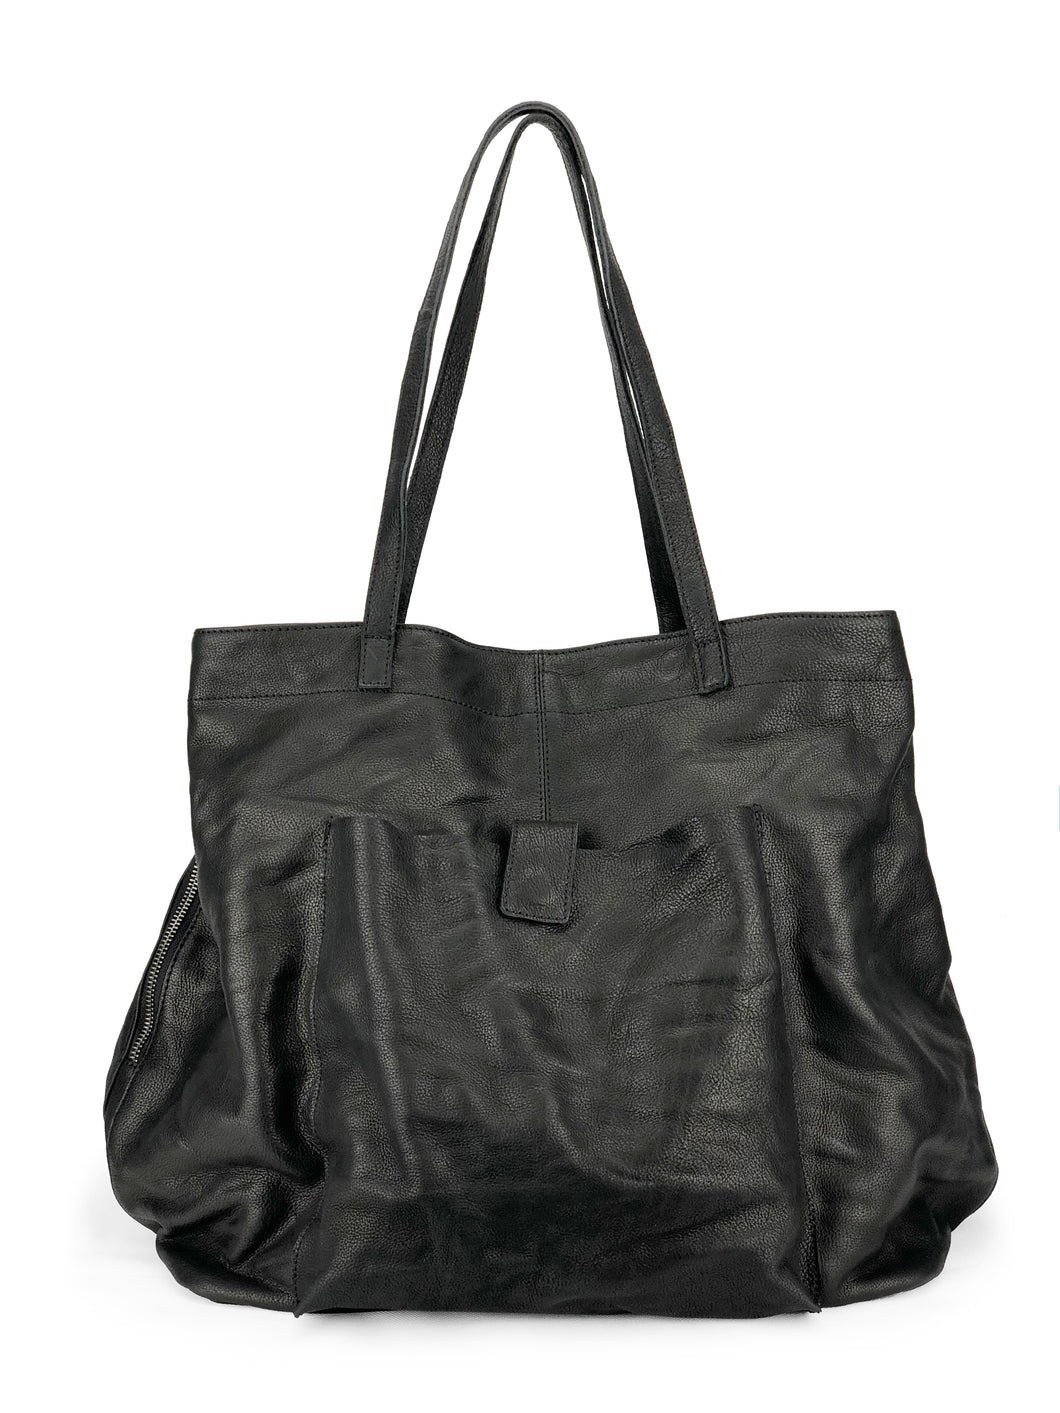 Large Leather Tote - Black